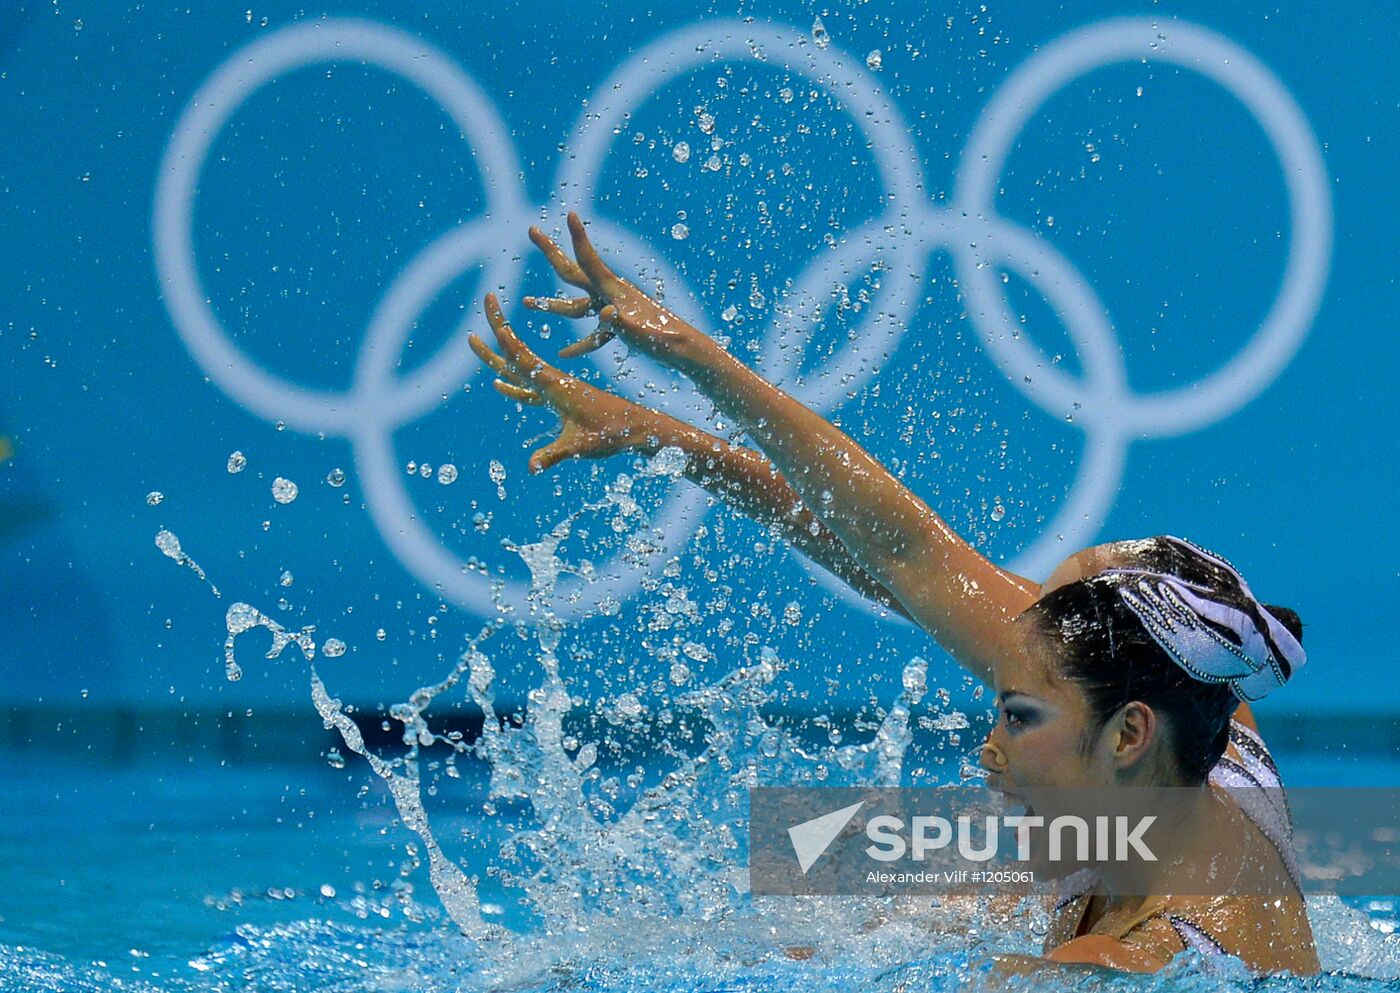 2012 Olympics. Women's Duets. Synchronised Swimming Free Routine